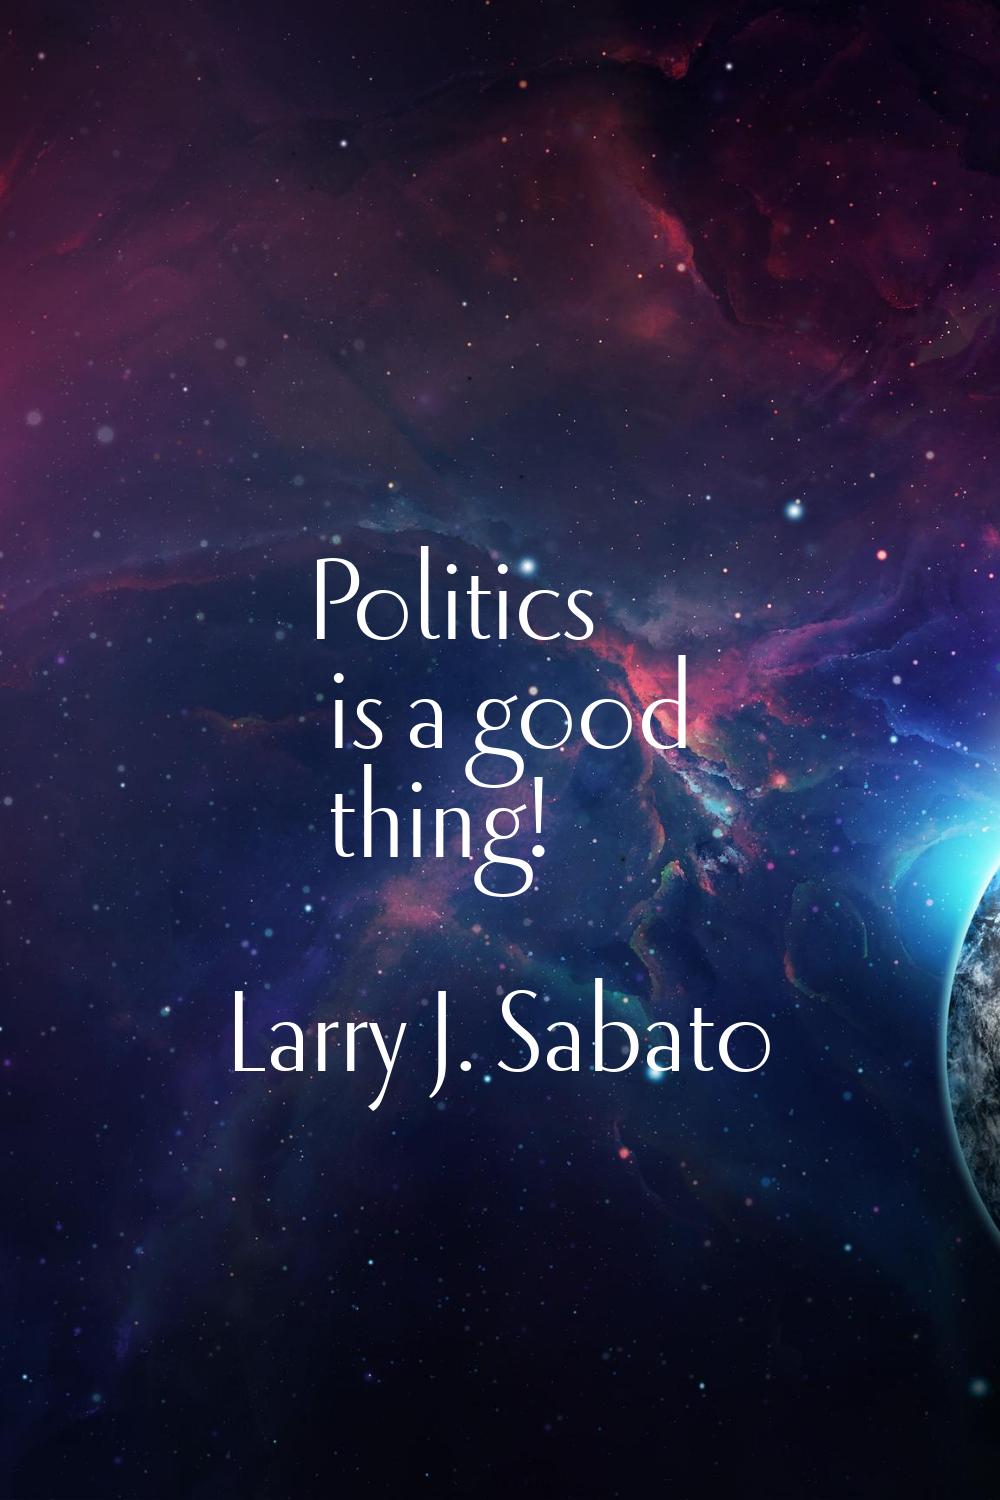 Politics is a good thing!